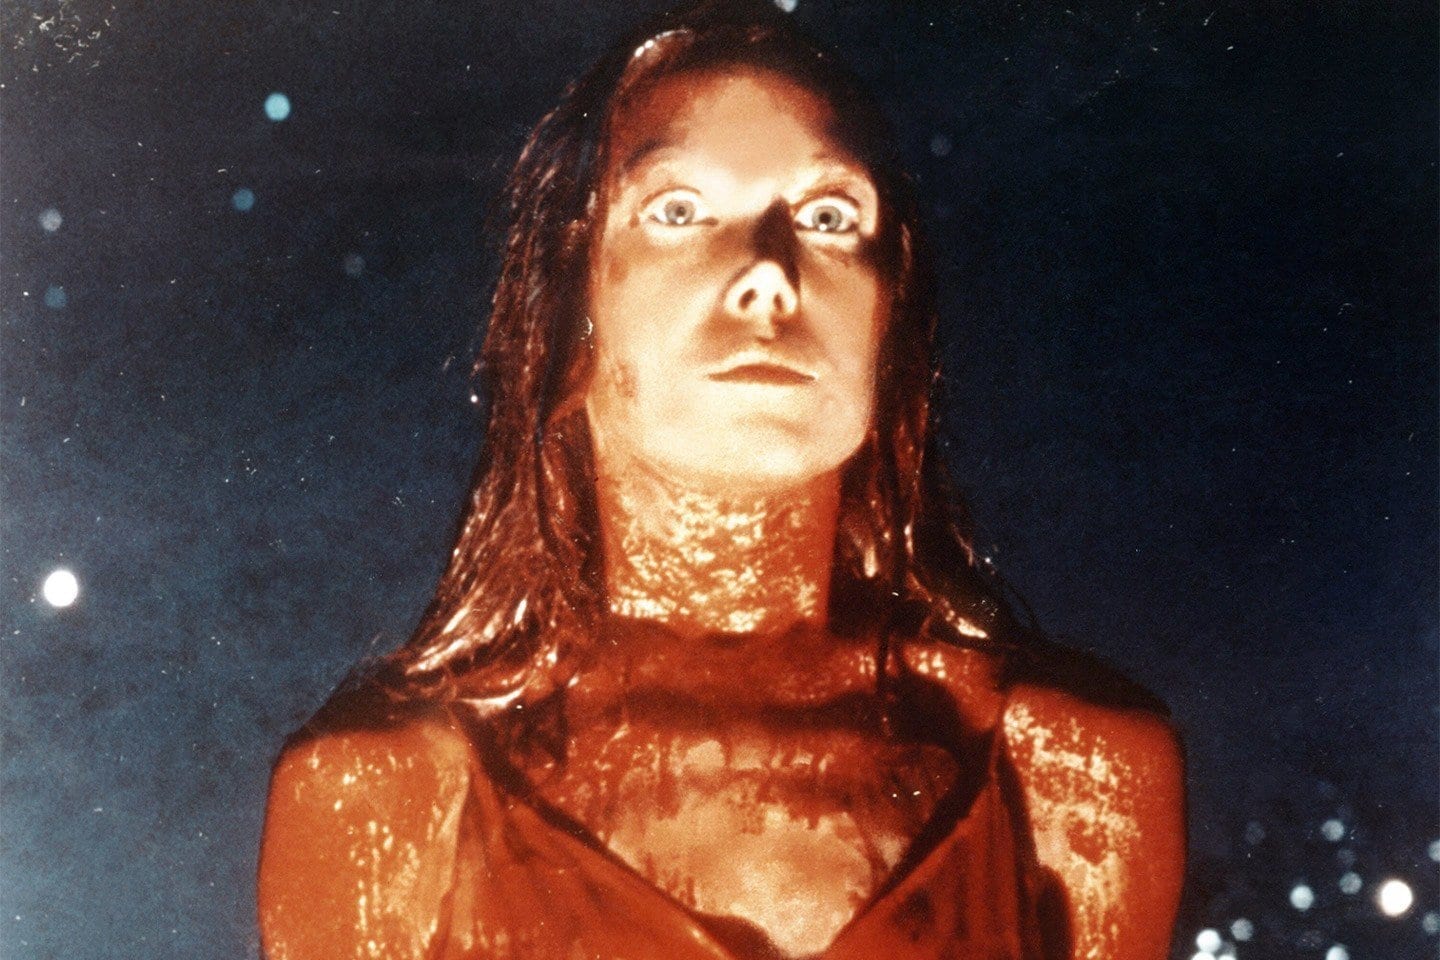 Carrie White (Sissy Spacek) is one of many relatable "monsters" King has created.